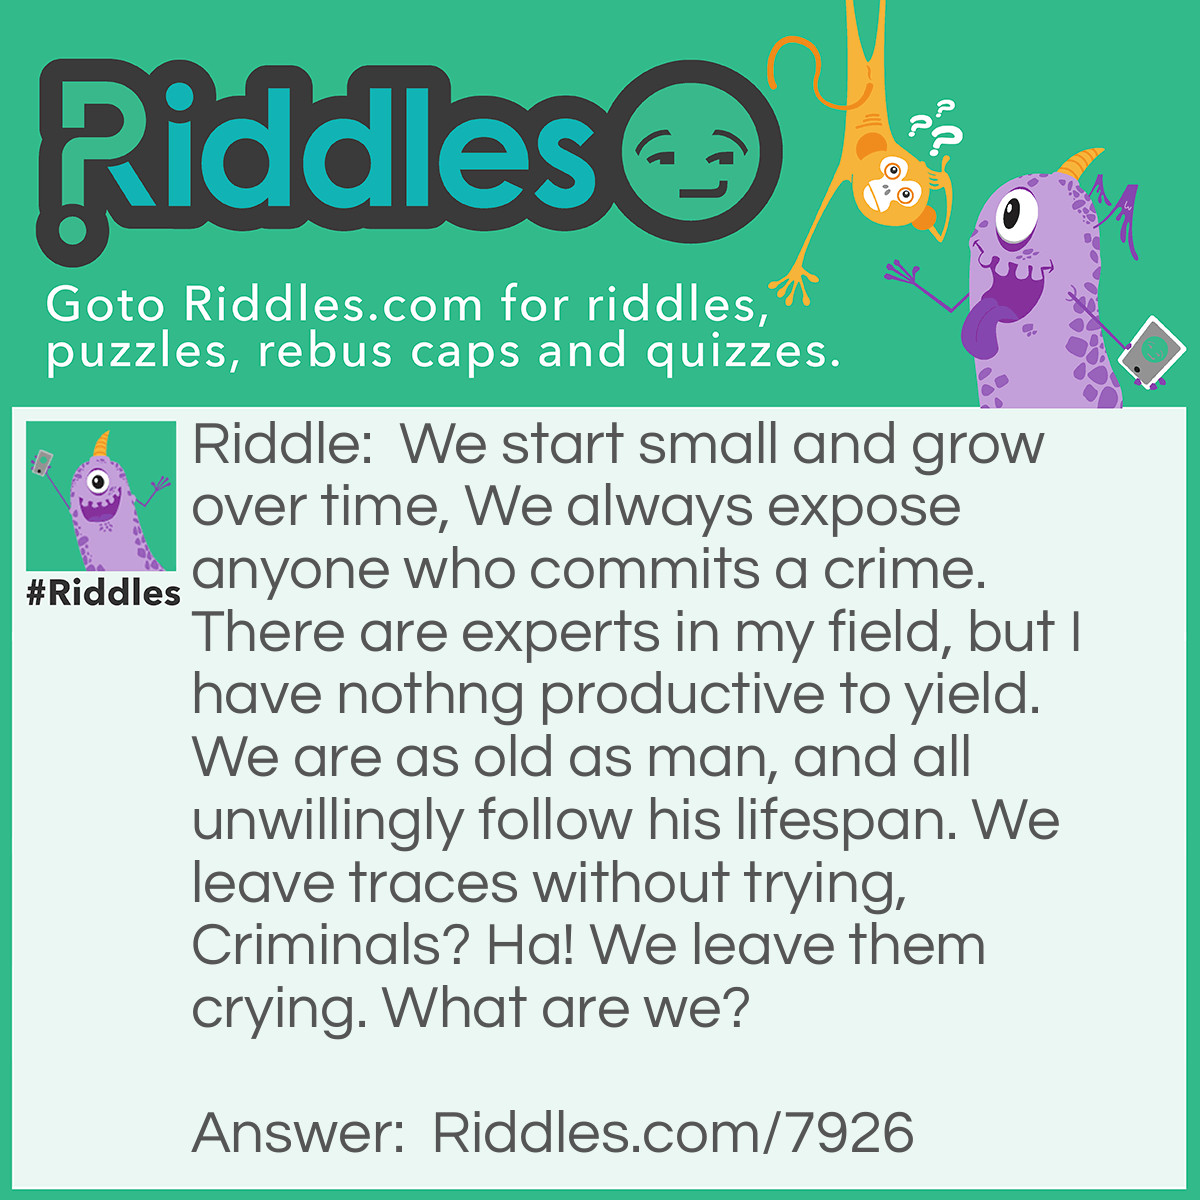 Riddle: We start small and grow over time, We always expose anyone who commits a crime. There are experts in my field, but I have nothing productive to yield. We are as old as man, and all unwillingly follow his lifespan. We leave traces without trying, Criminals? Ha! We leave them crying. What are we? Answer: Unsure